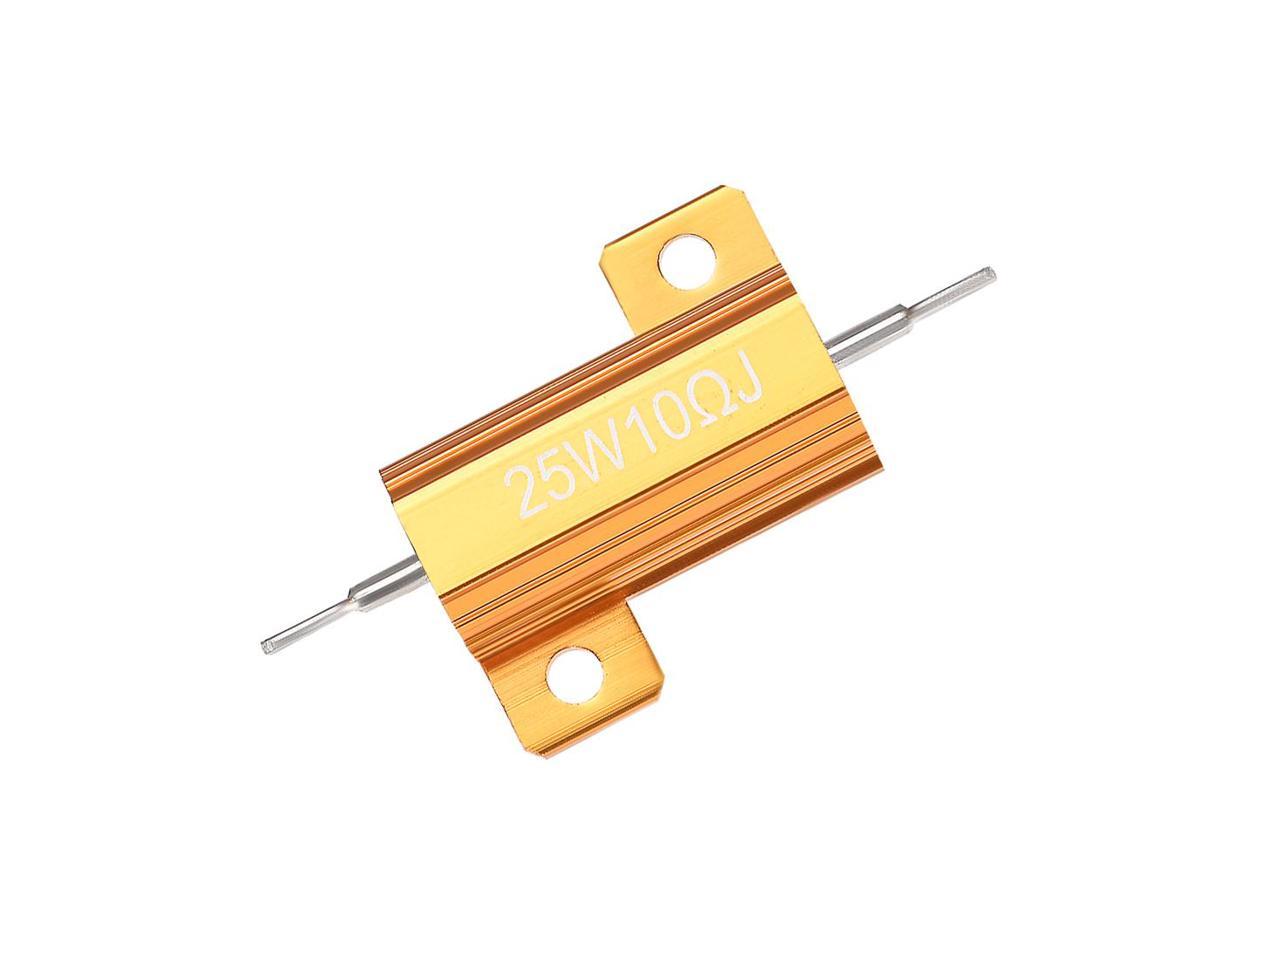 uxcell 50W 6.8 Ohm 5% Aluminum Housing Resistor Screw Tap Chassis Mounted Aluminum Case Wirewound Resistor Load Resistors Gold Tone 2pcs 